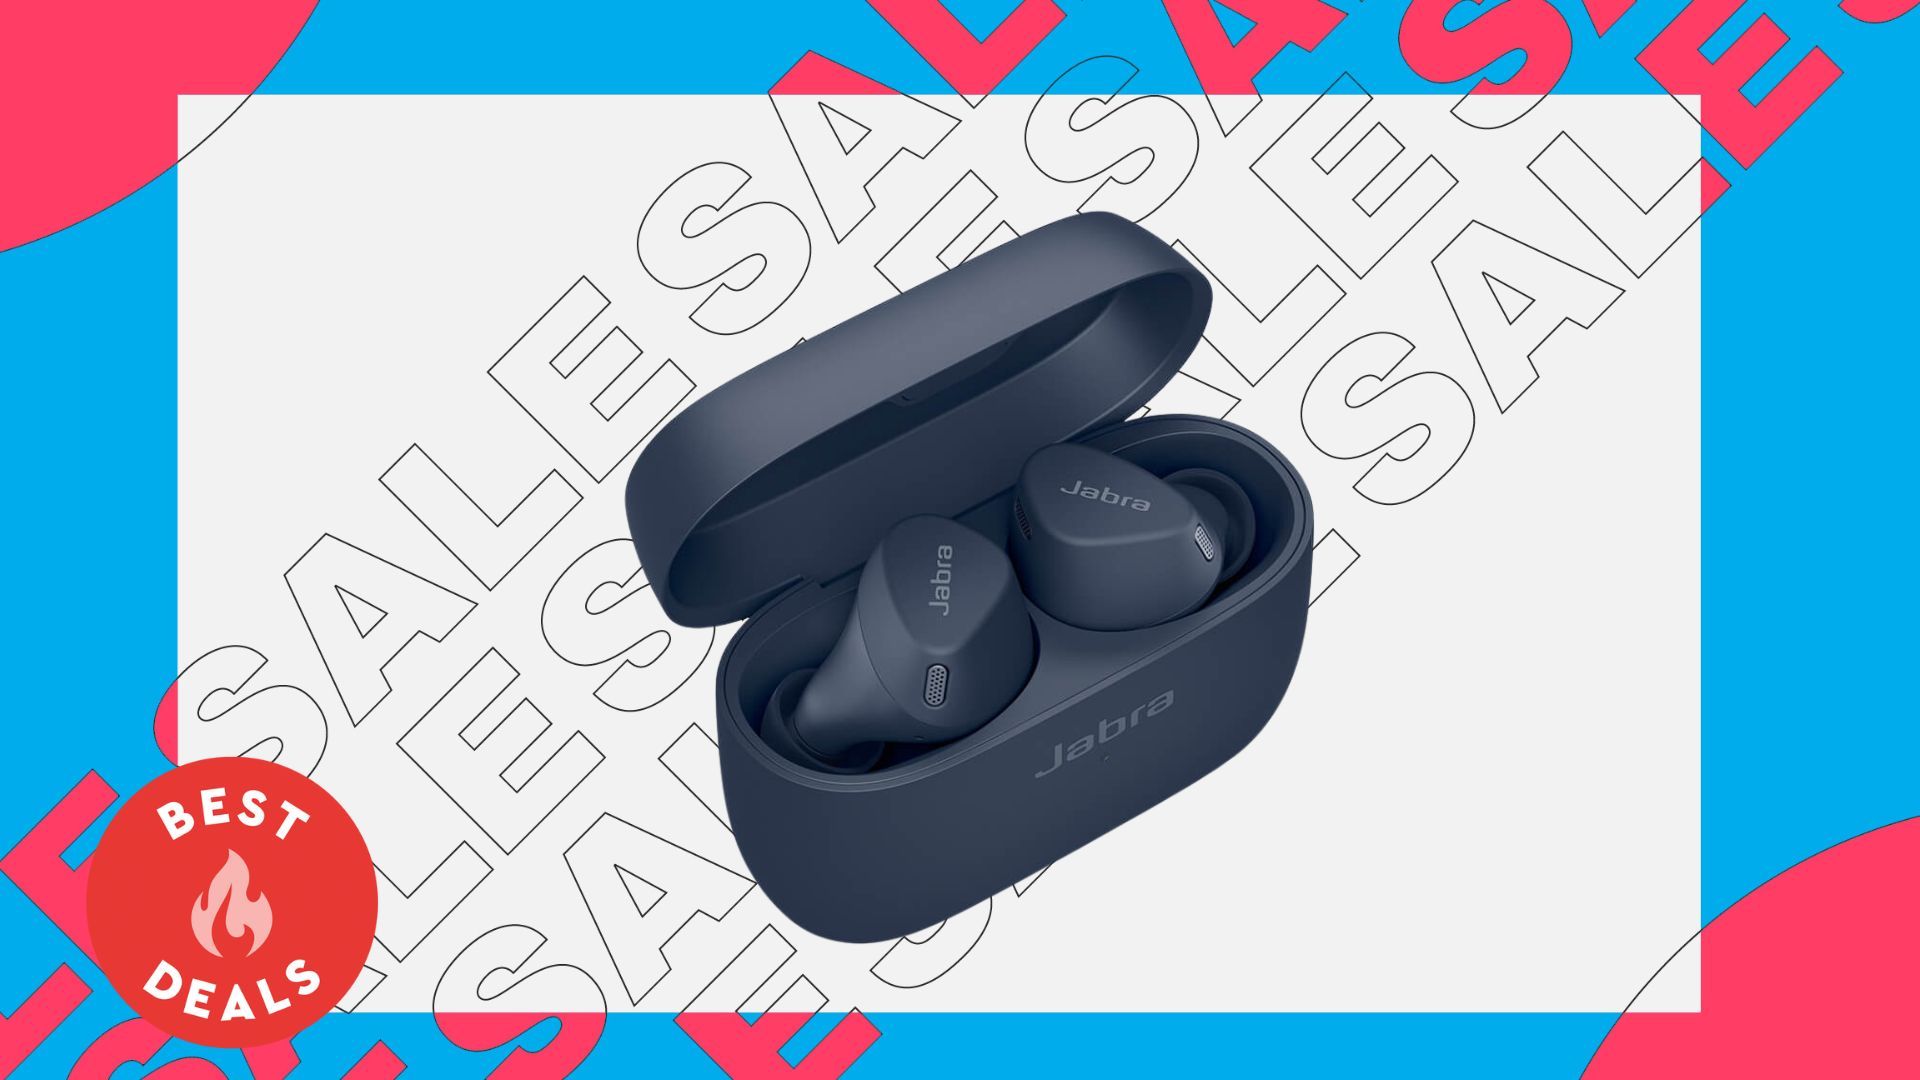 These great Jabra workout earbuds are near their lowest price ever for Black Friday